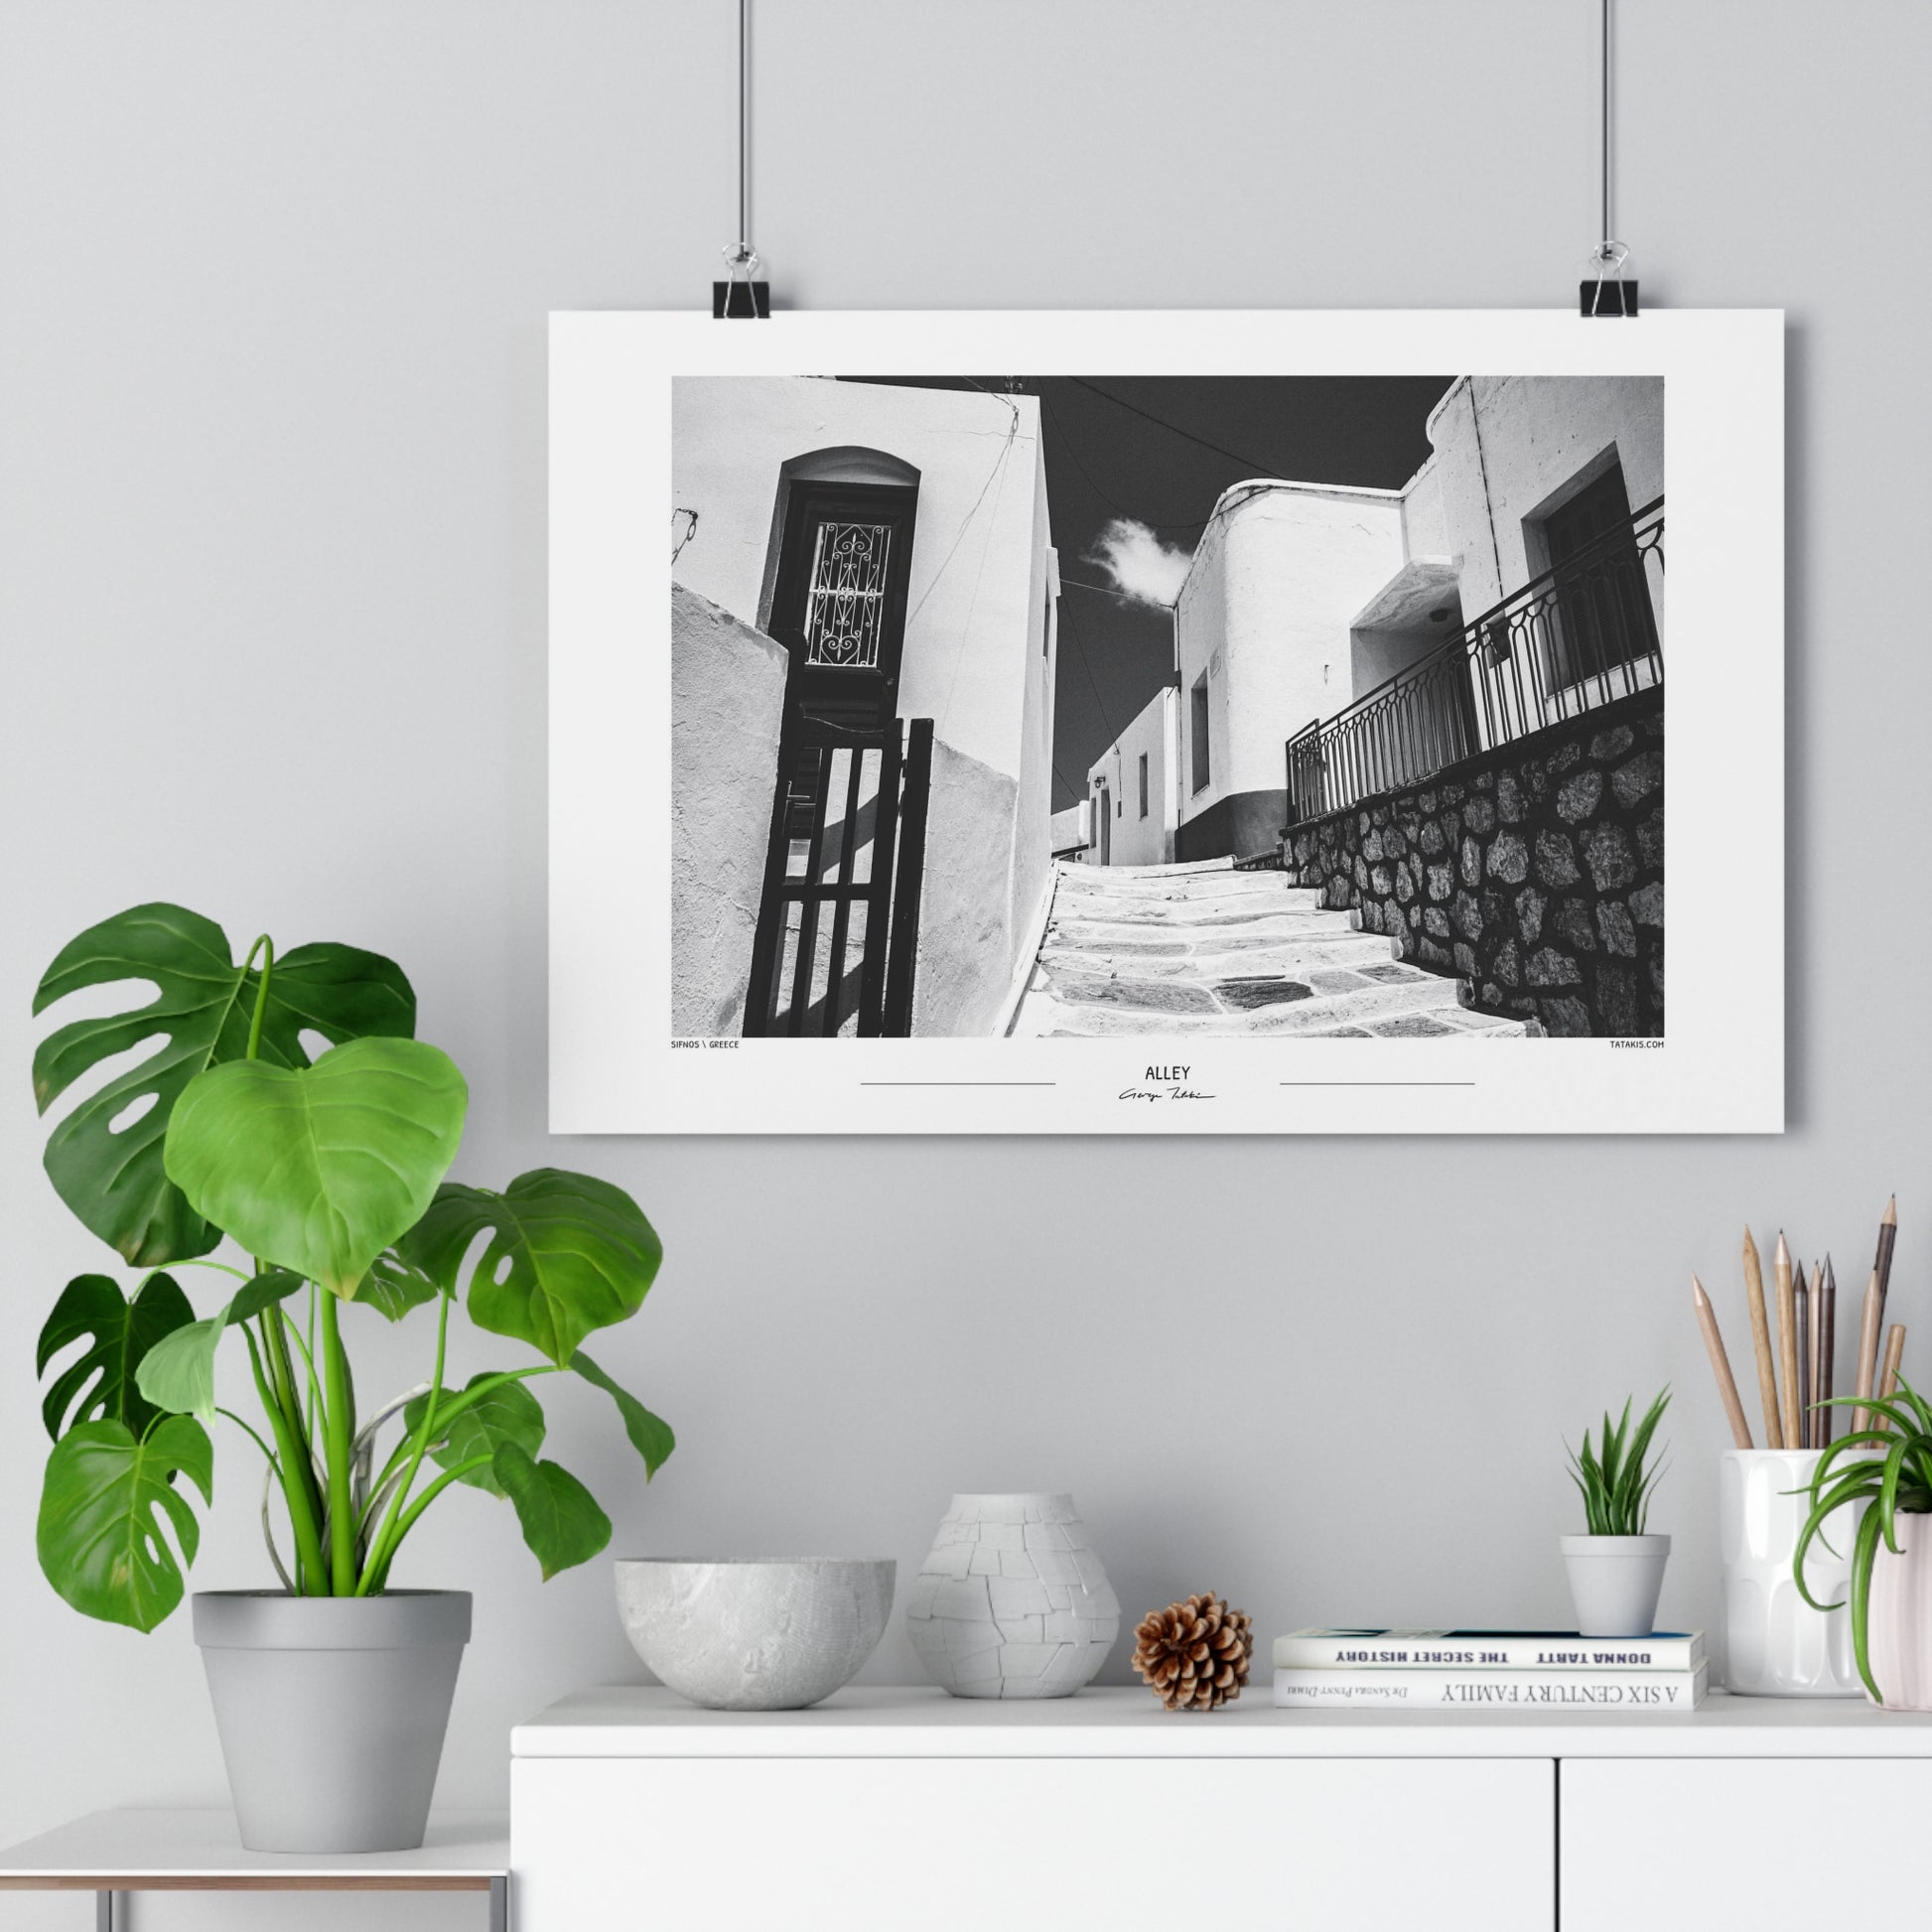 Black and White Photo Wall Art Poster from Greece | Alley with white houses on Sifnos island, by George Tatakis - small size